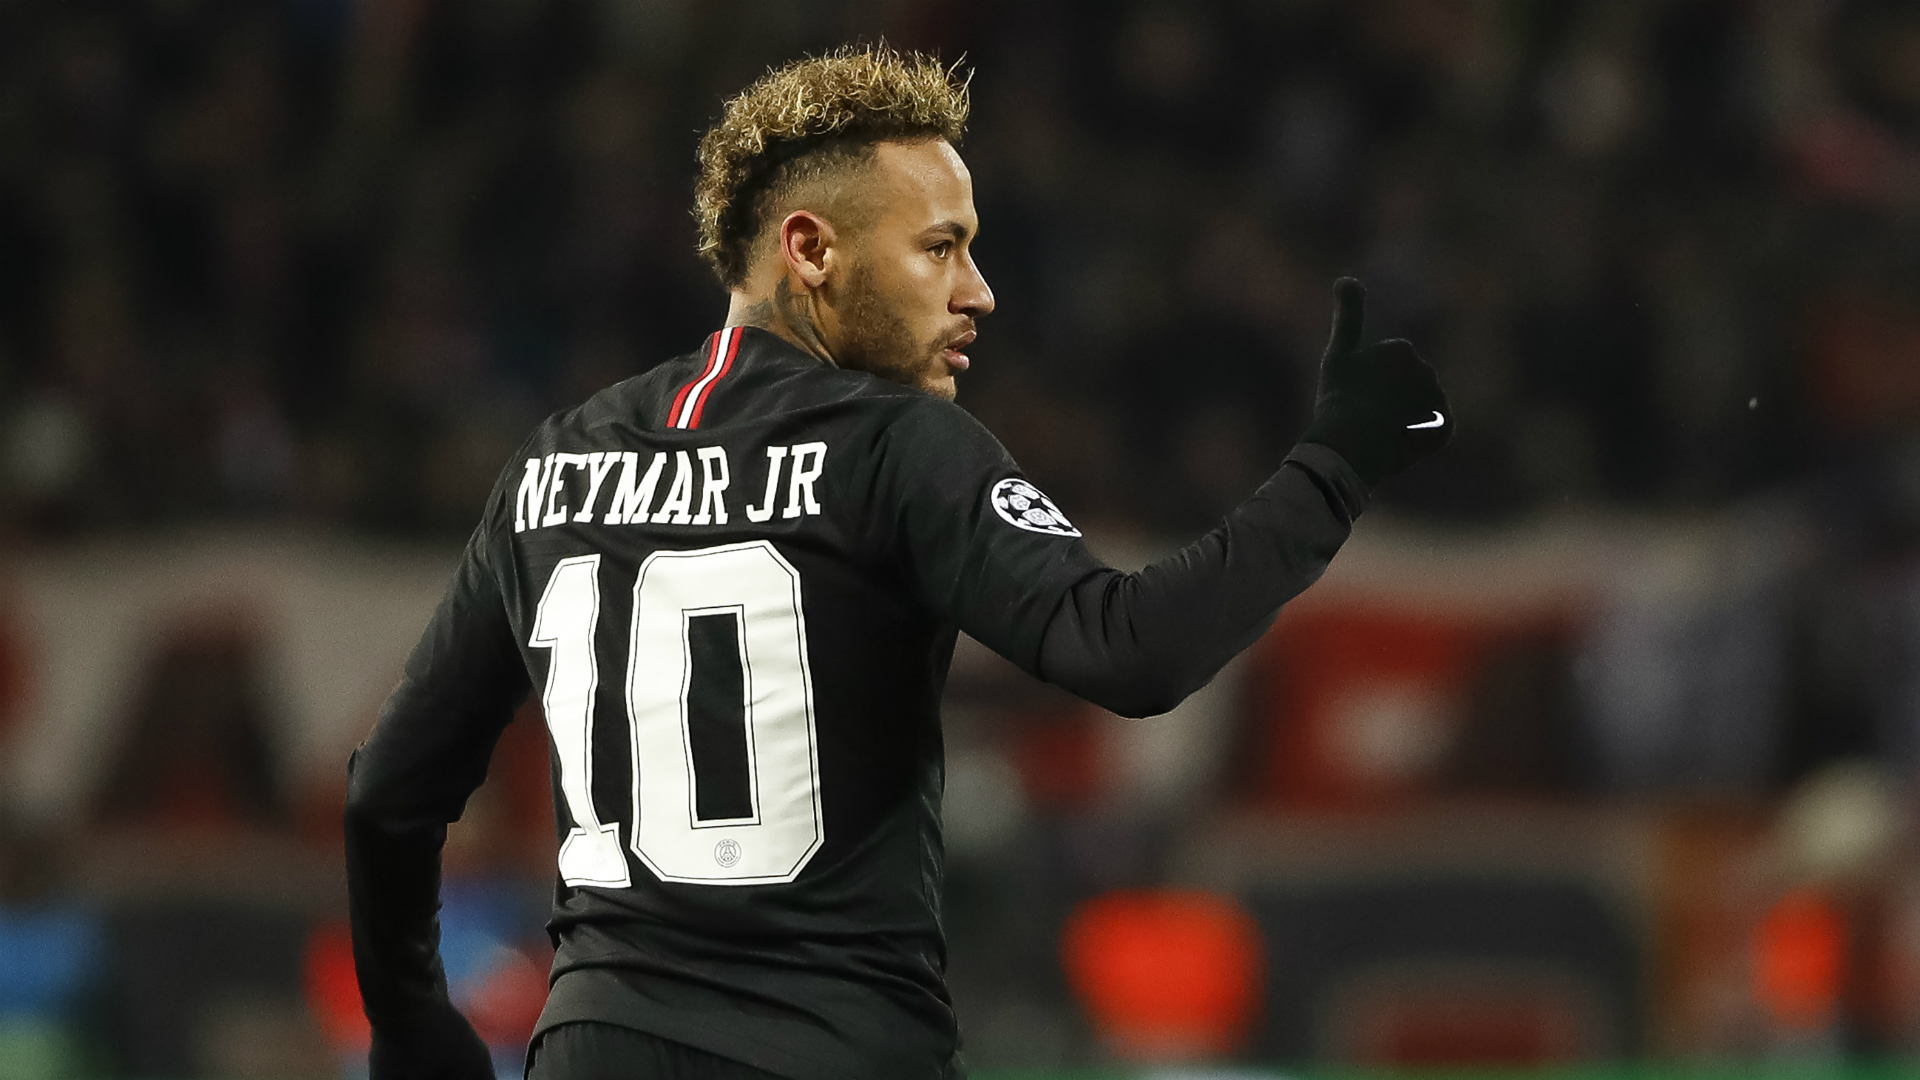 With his injury recovery almost complete, Paris Saint-Germain have named Neymar in Thomas Tuchel's 33-man group for the trip to China.